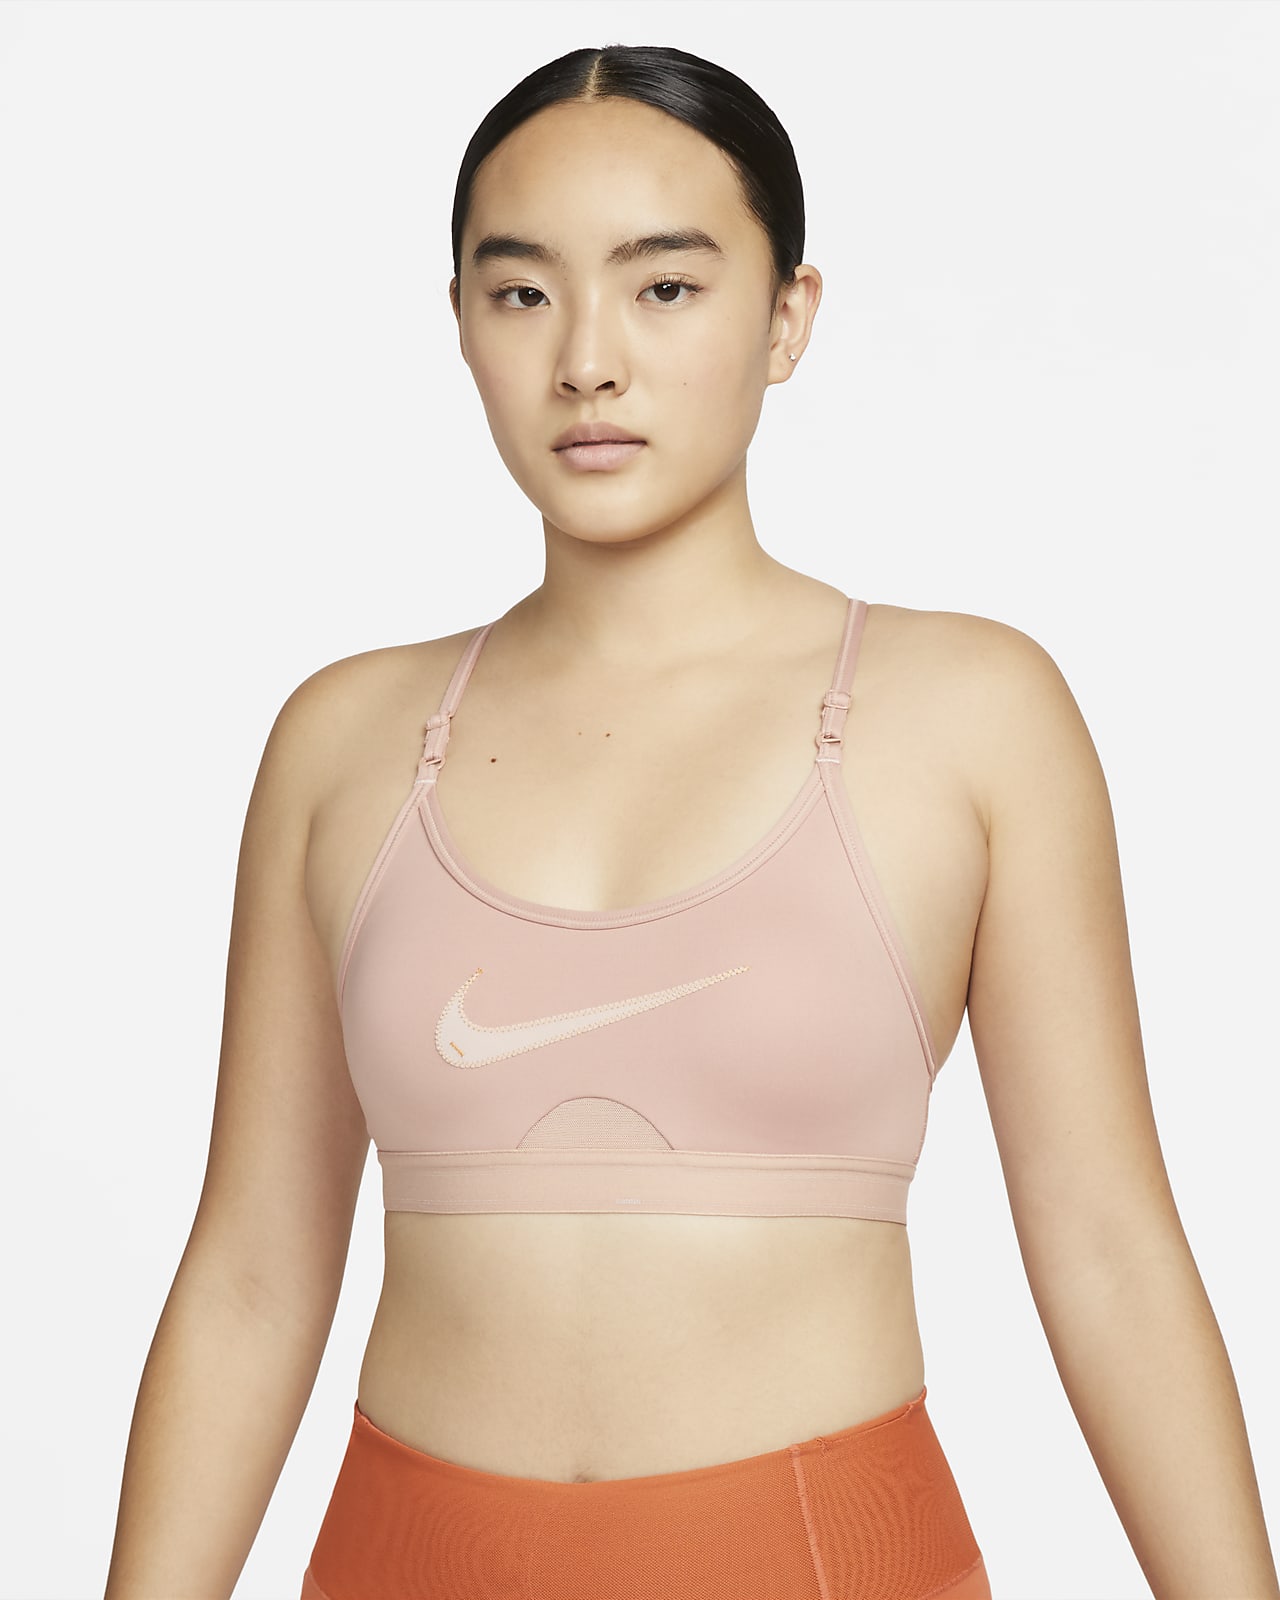 https://static.nike.com/a/images/t_PDP_1280_v1/f_auto,q_auto:eco/039ac6f4-62e3-4937-afb0-c8be99b4bec6/indy-light-support-padded-graphic-sports-bra-kdFQDk.png